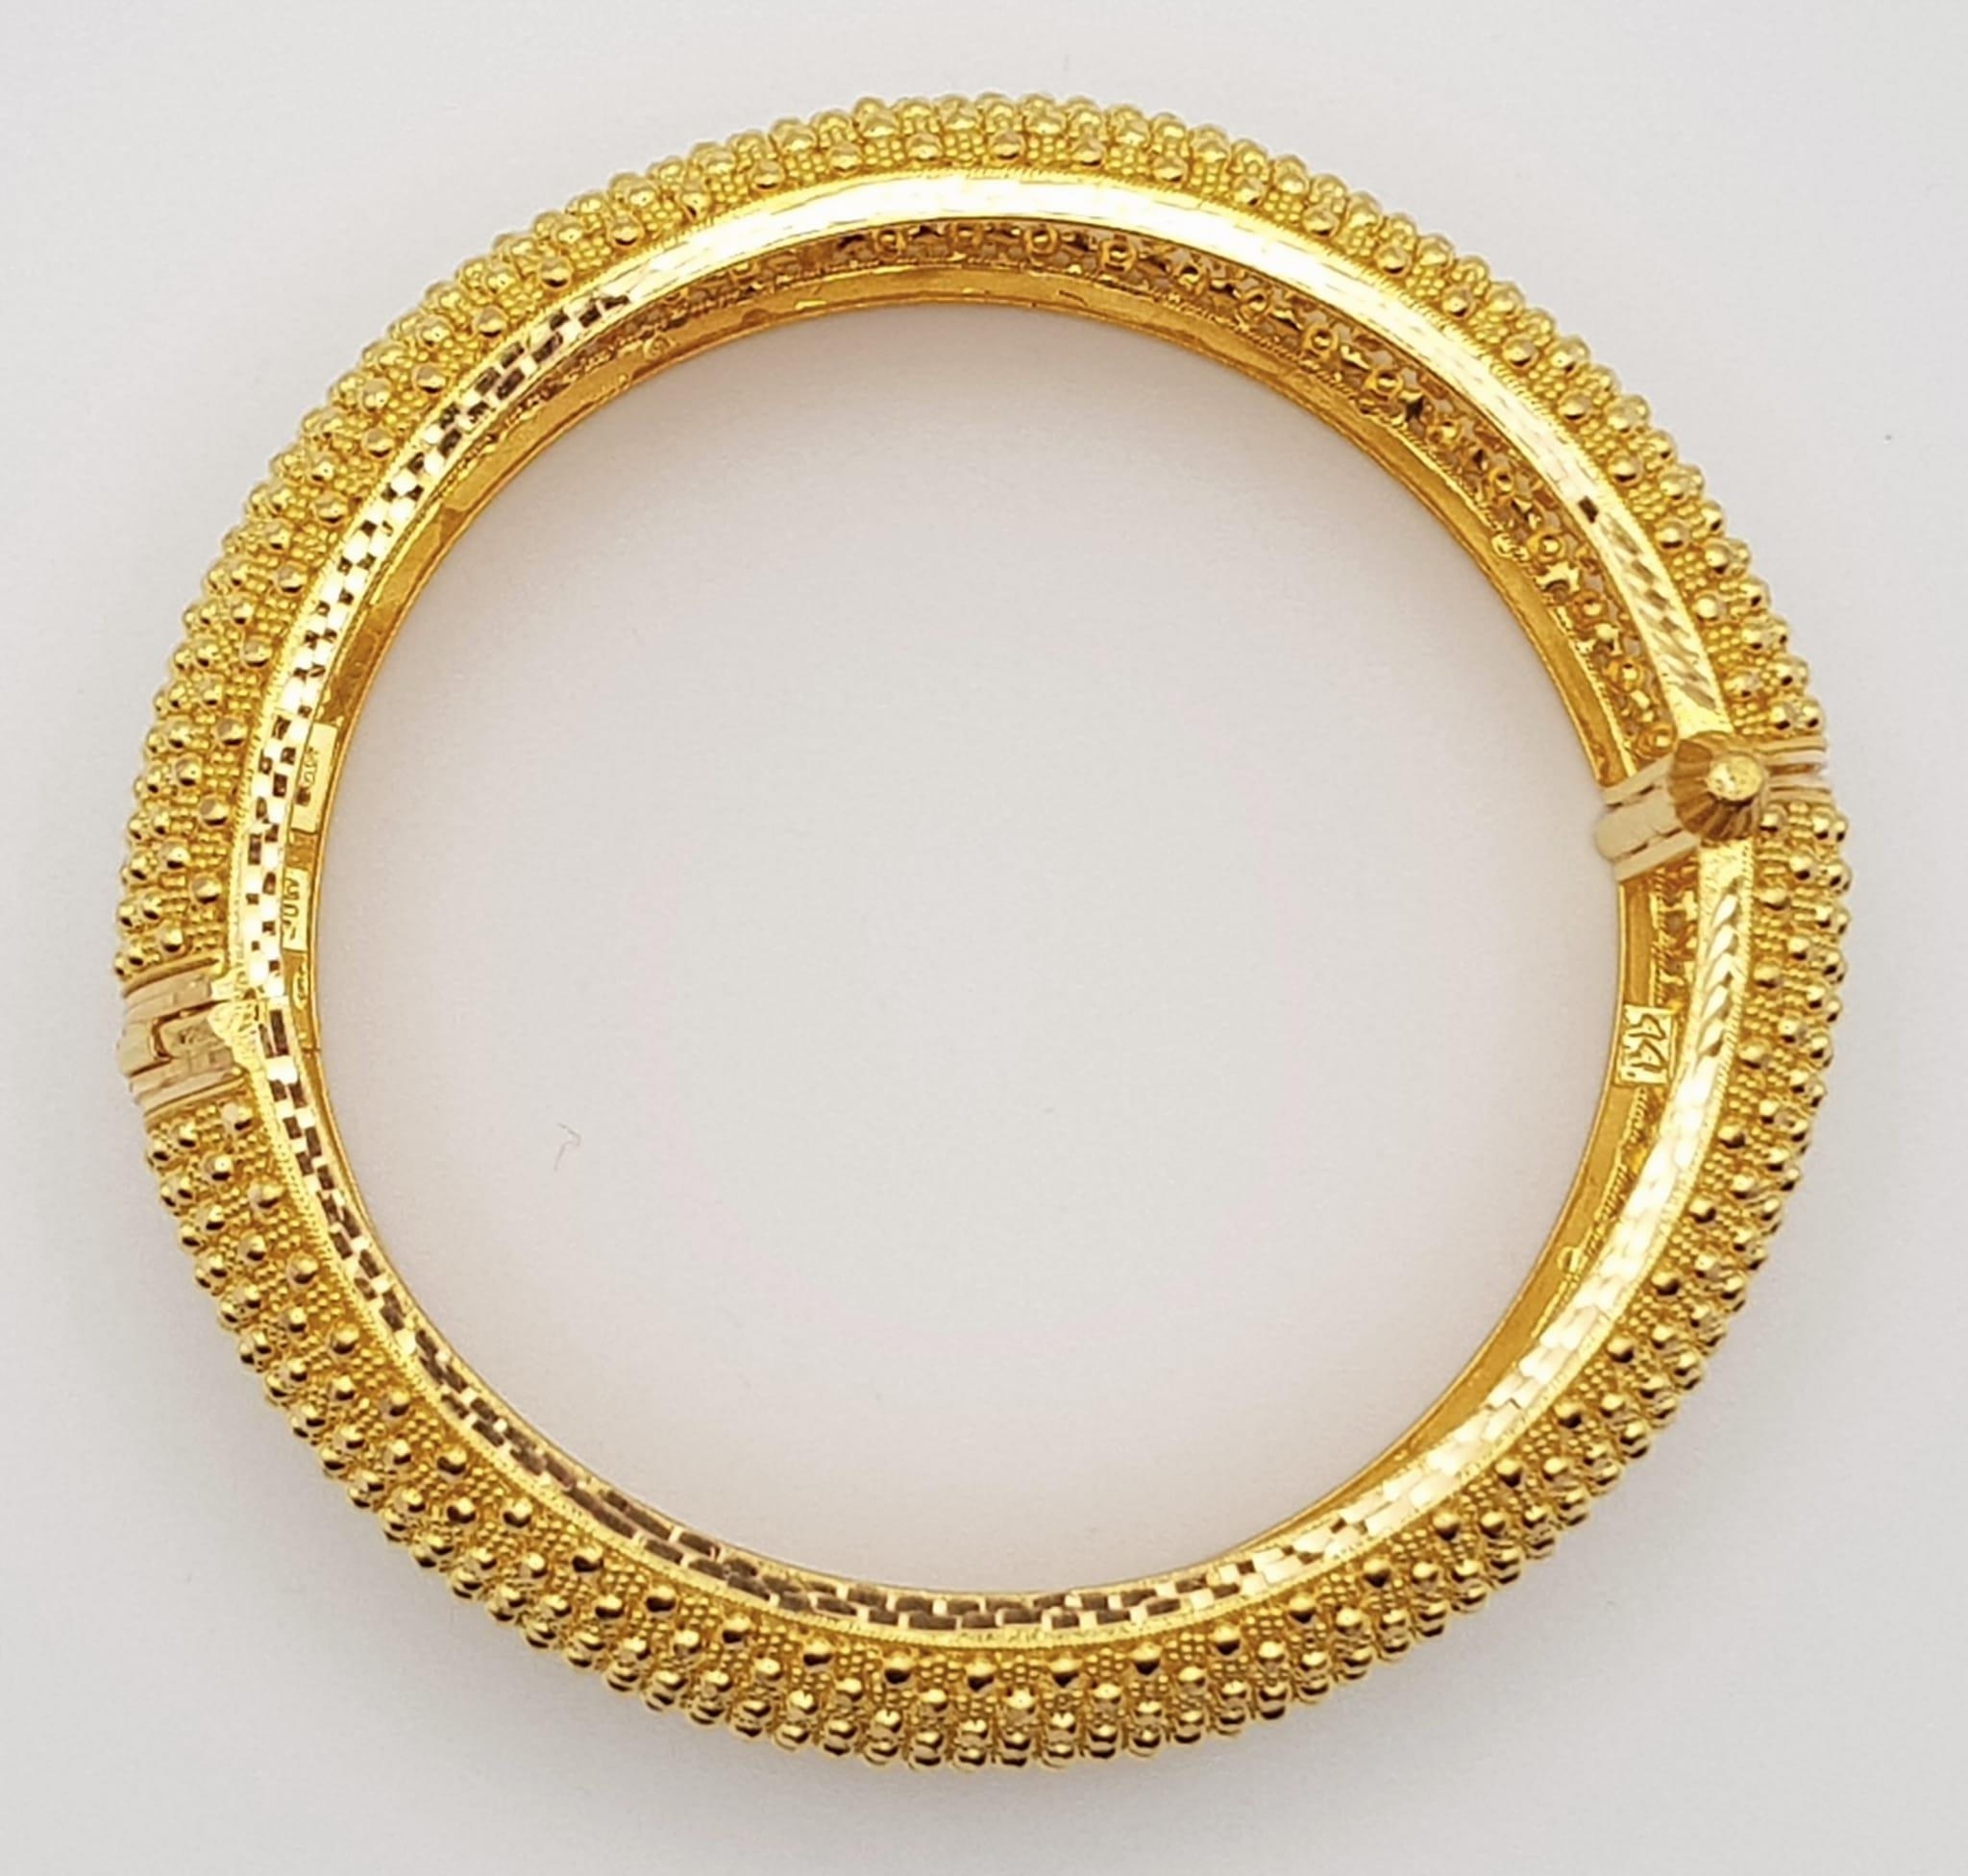 A 22k Yellow Gold Geometric Dimple Design Wide Bangle. 6cm inner diameter. 43.2g. - Image 3 of 5